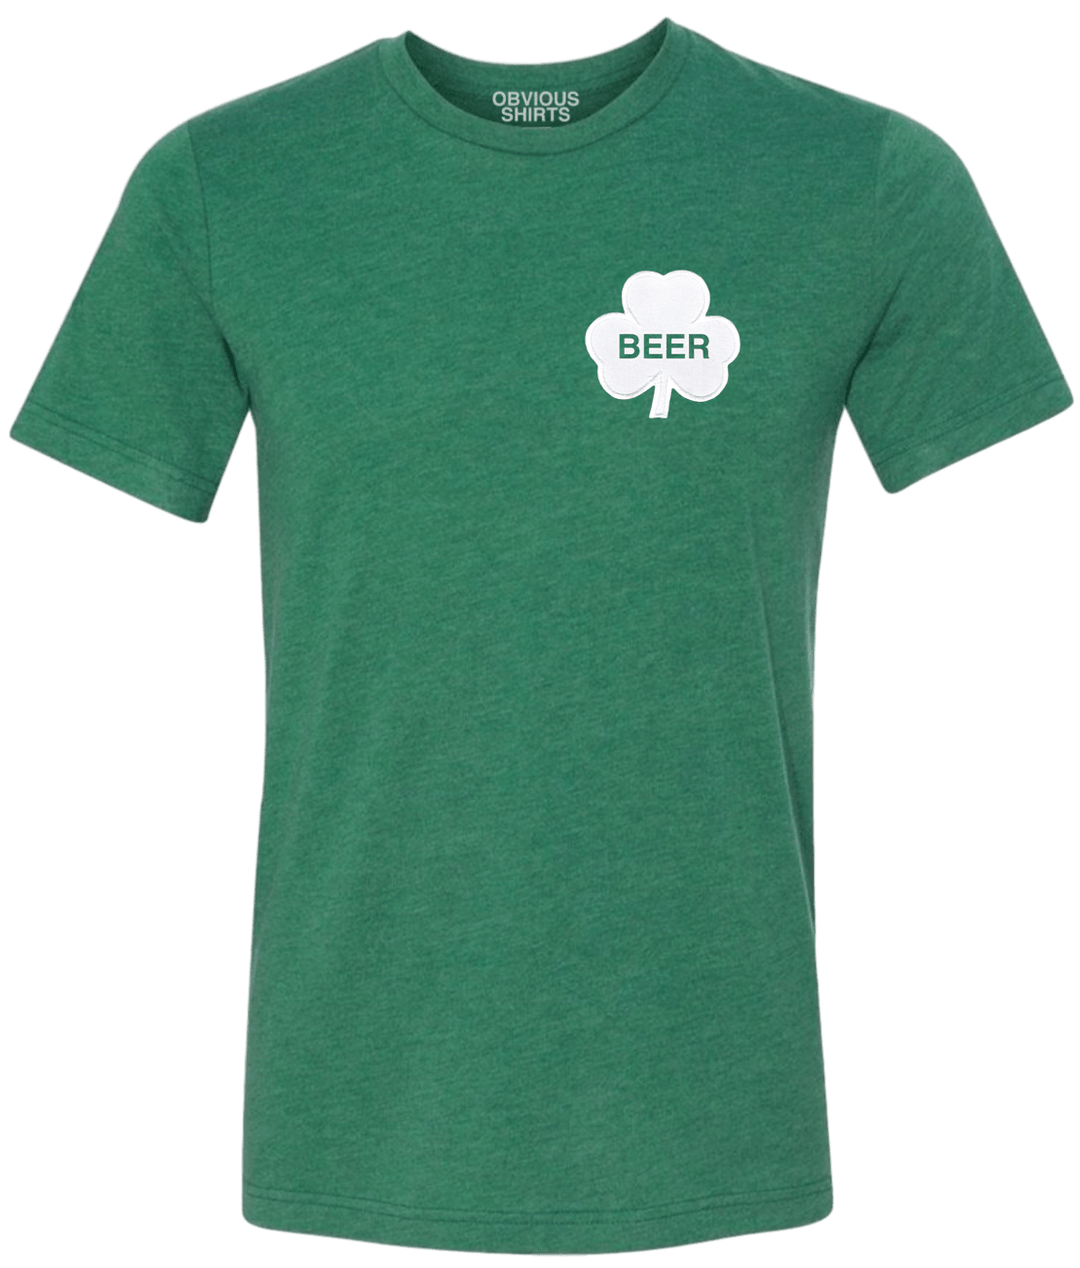 GREEN BEER CLOVER. - OBVIOUS SHIRTS